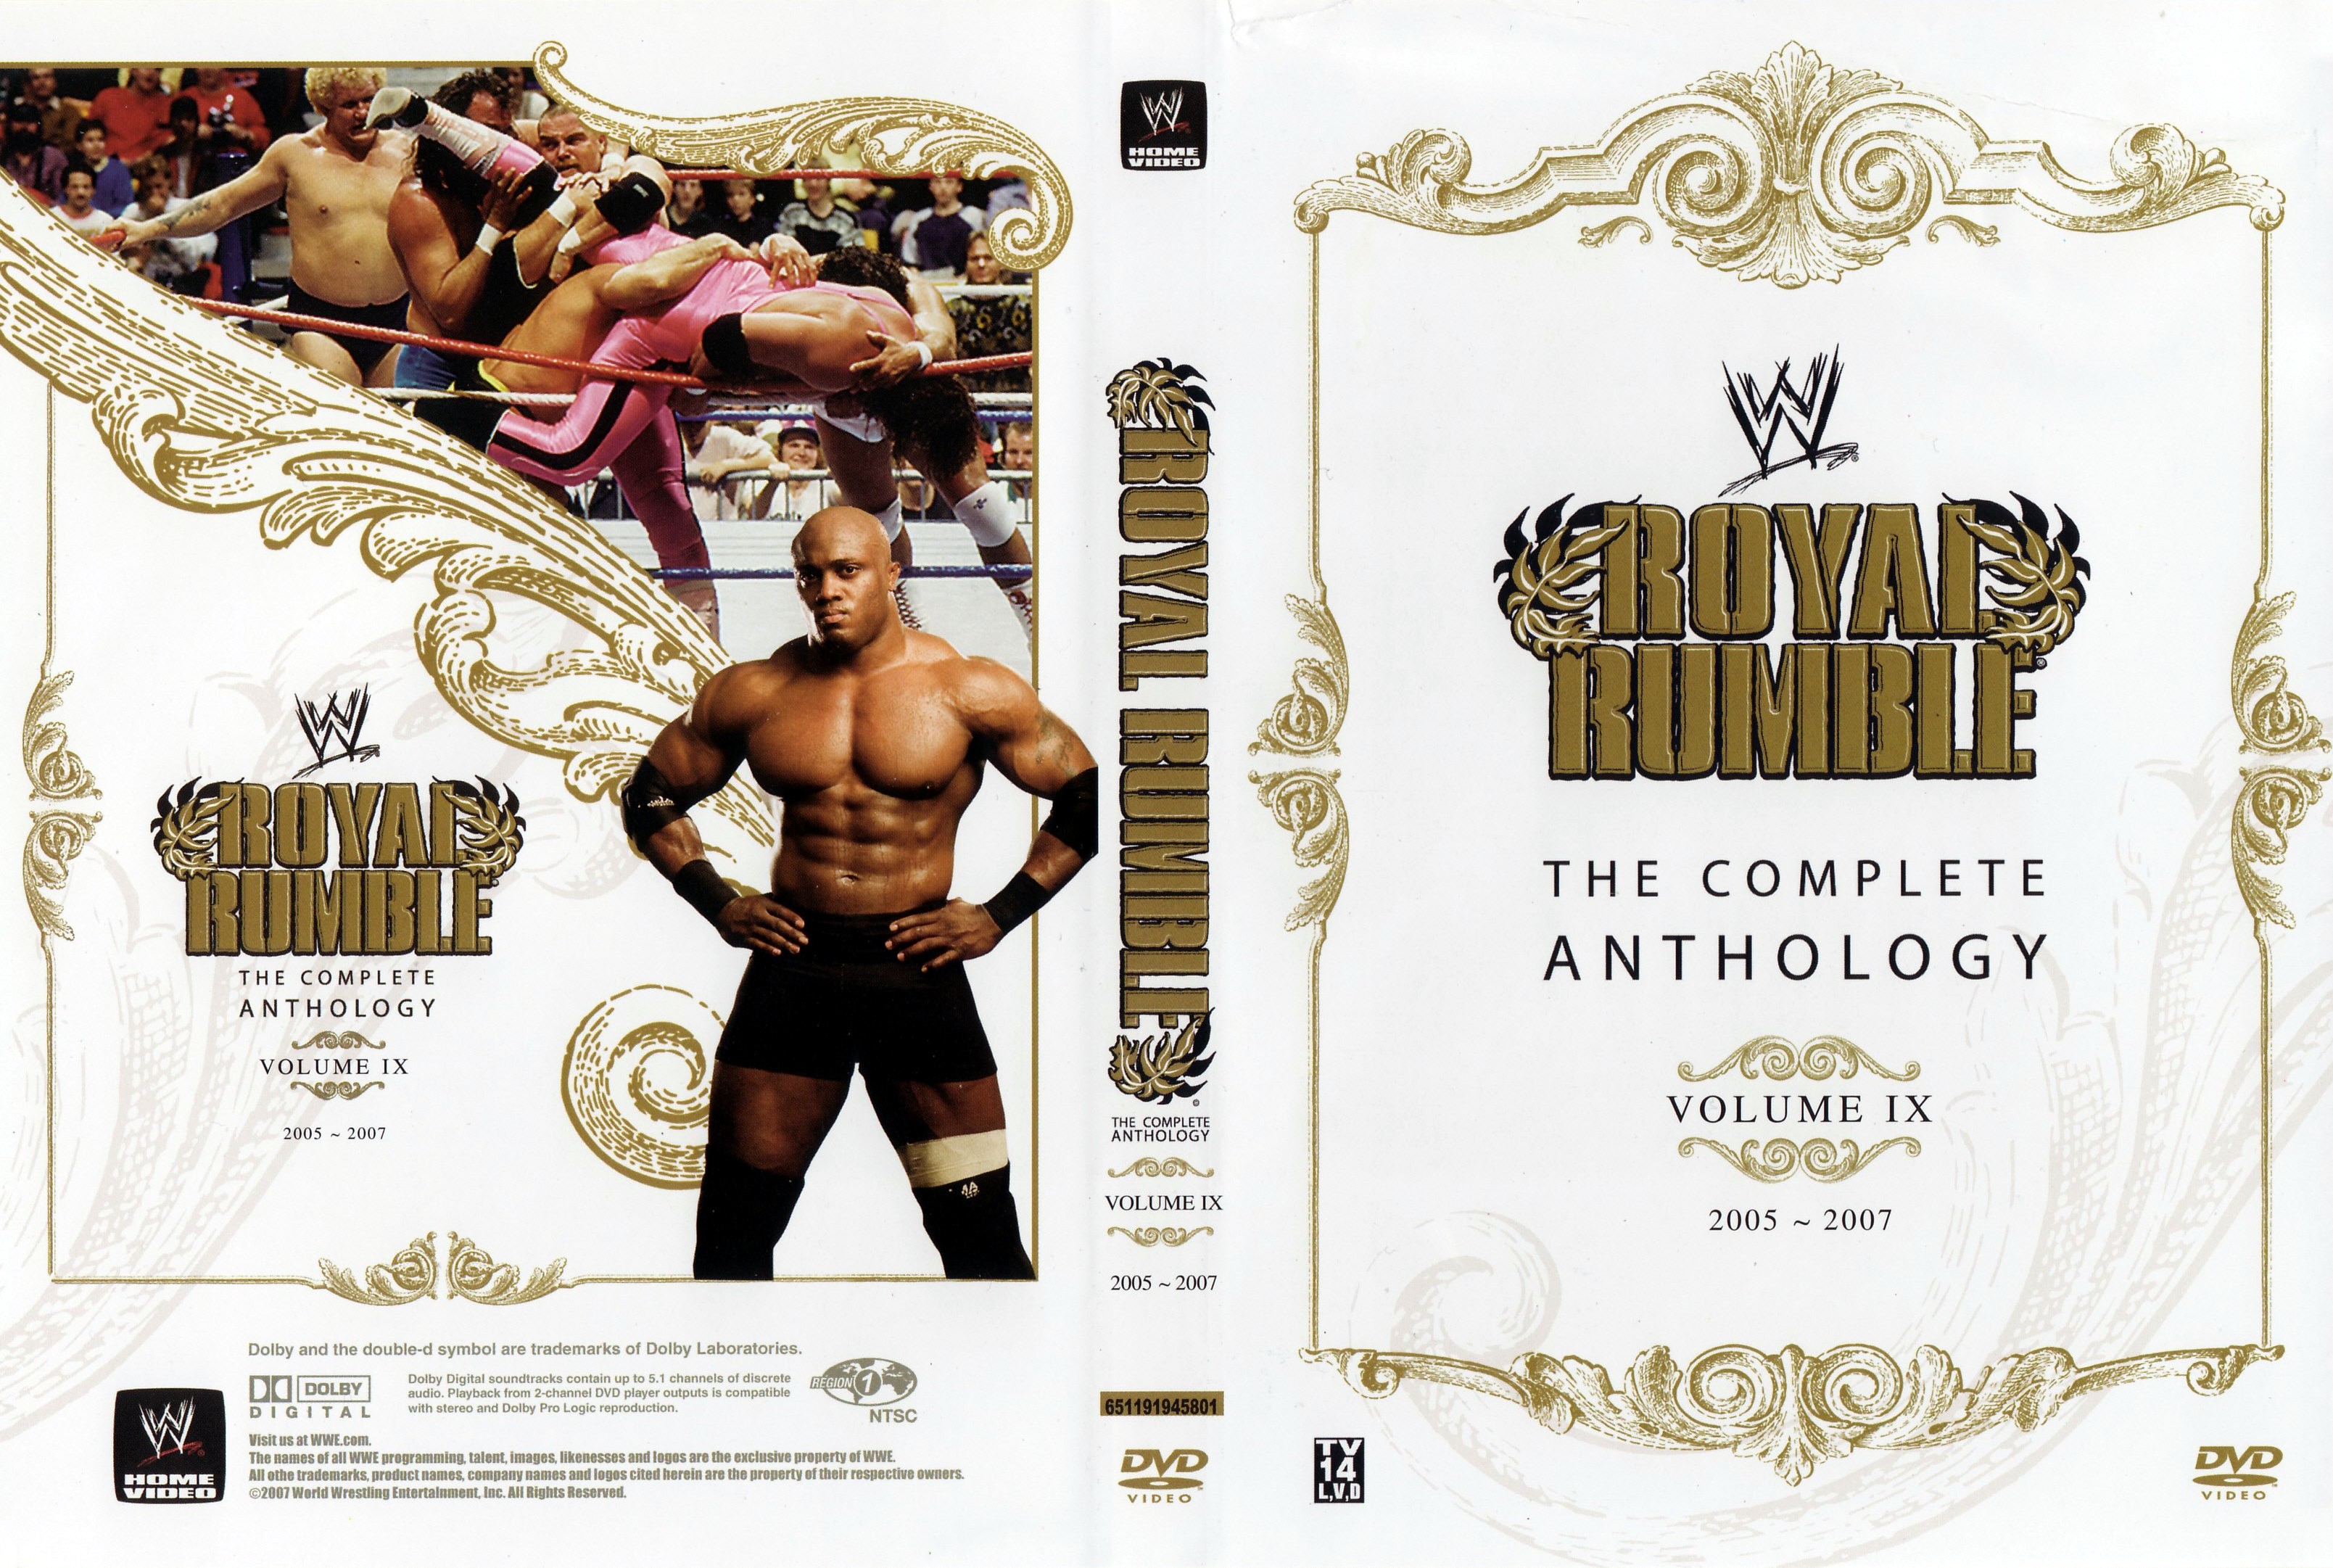 Jaquette DVD WWE Royal Rumble the complete antology vol 09